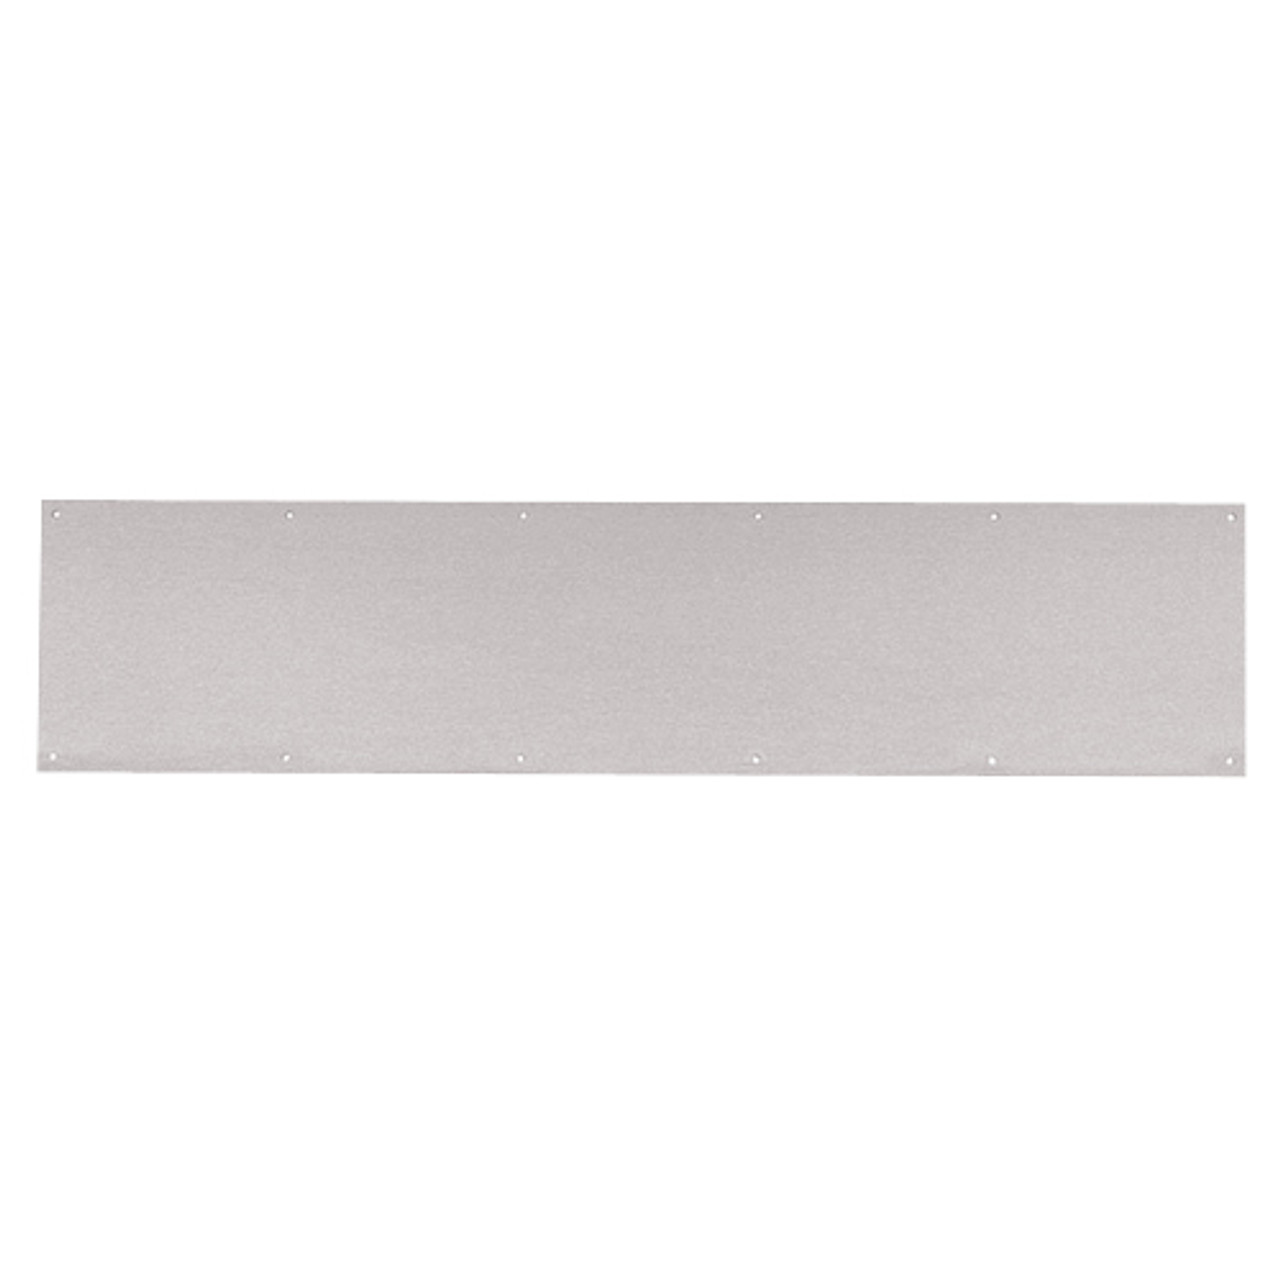 8400-US32D-10x28-B-CS Ives 8400 Series Protection Plate in Satin Stainless Steel